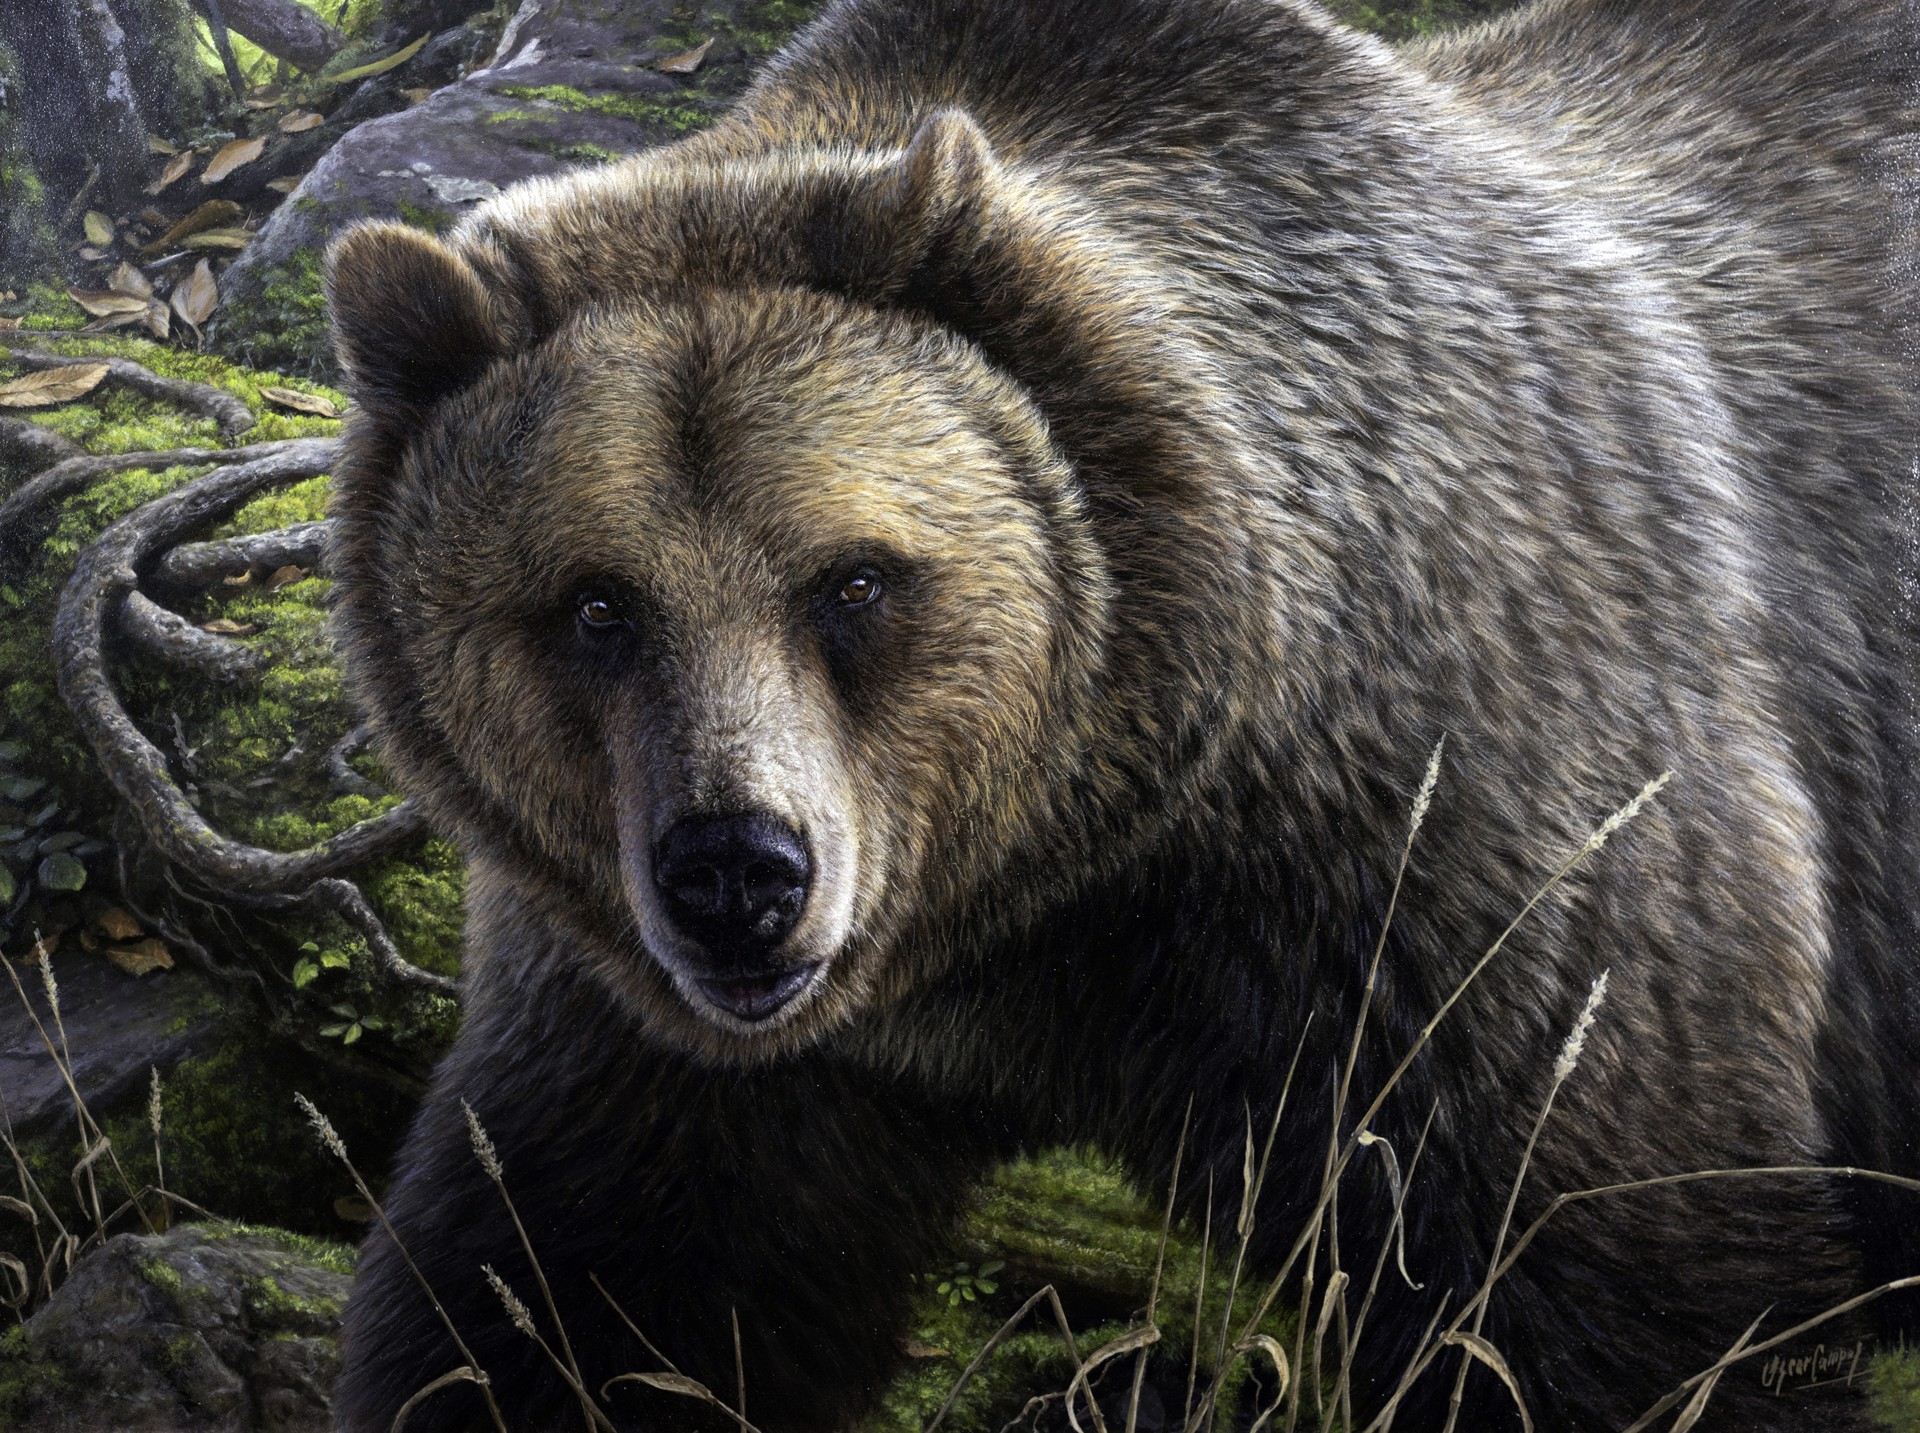 Grizzly's Domain - Unframed (Grizzly en su Dominio) by Oscar Campos